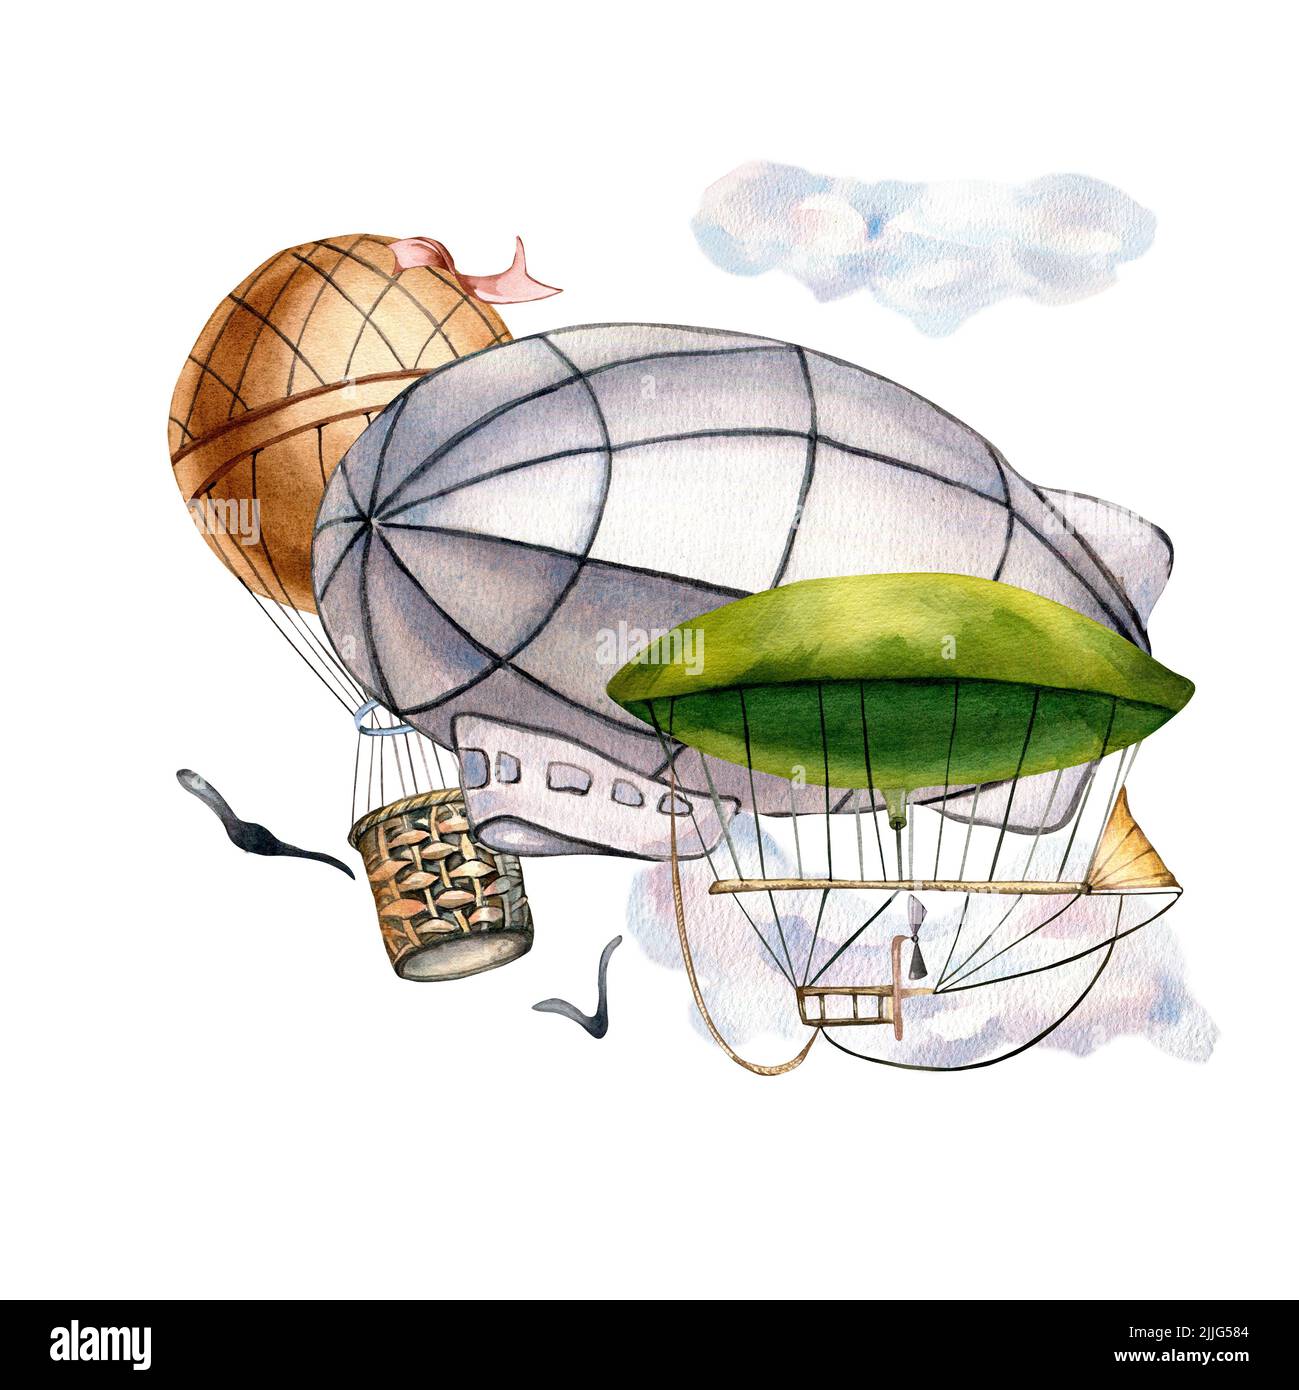 Composition of vintage aerostats watercolor illustration isolated on white background. Retro dirigible, hot air balloon in the clouds hand drawn. Desi Stock Photo